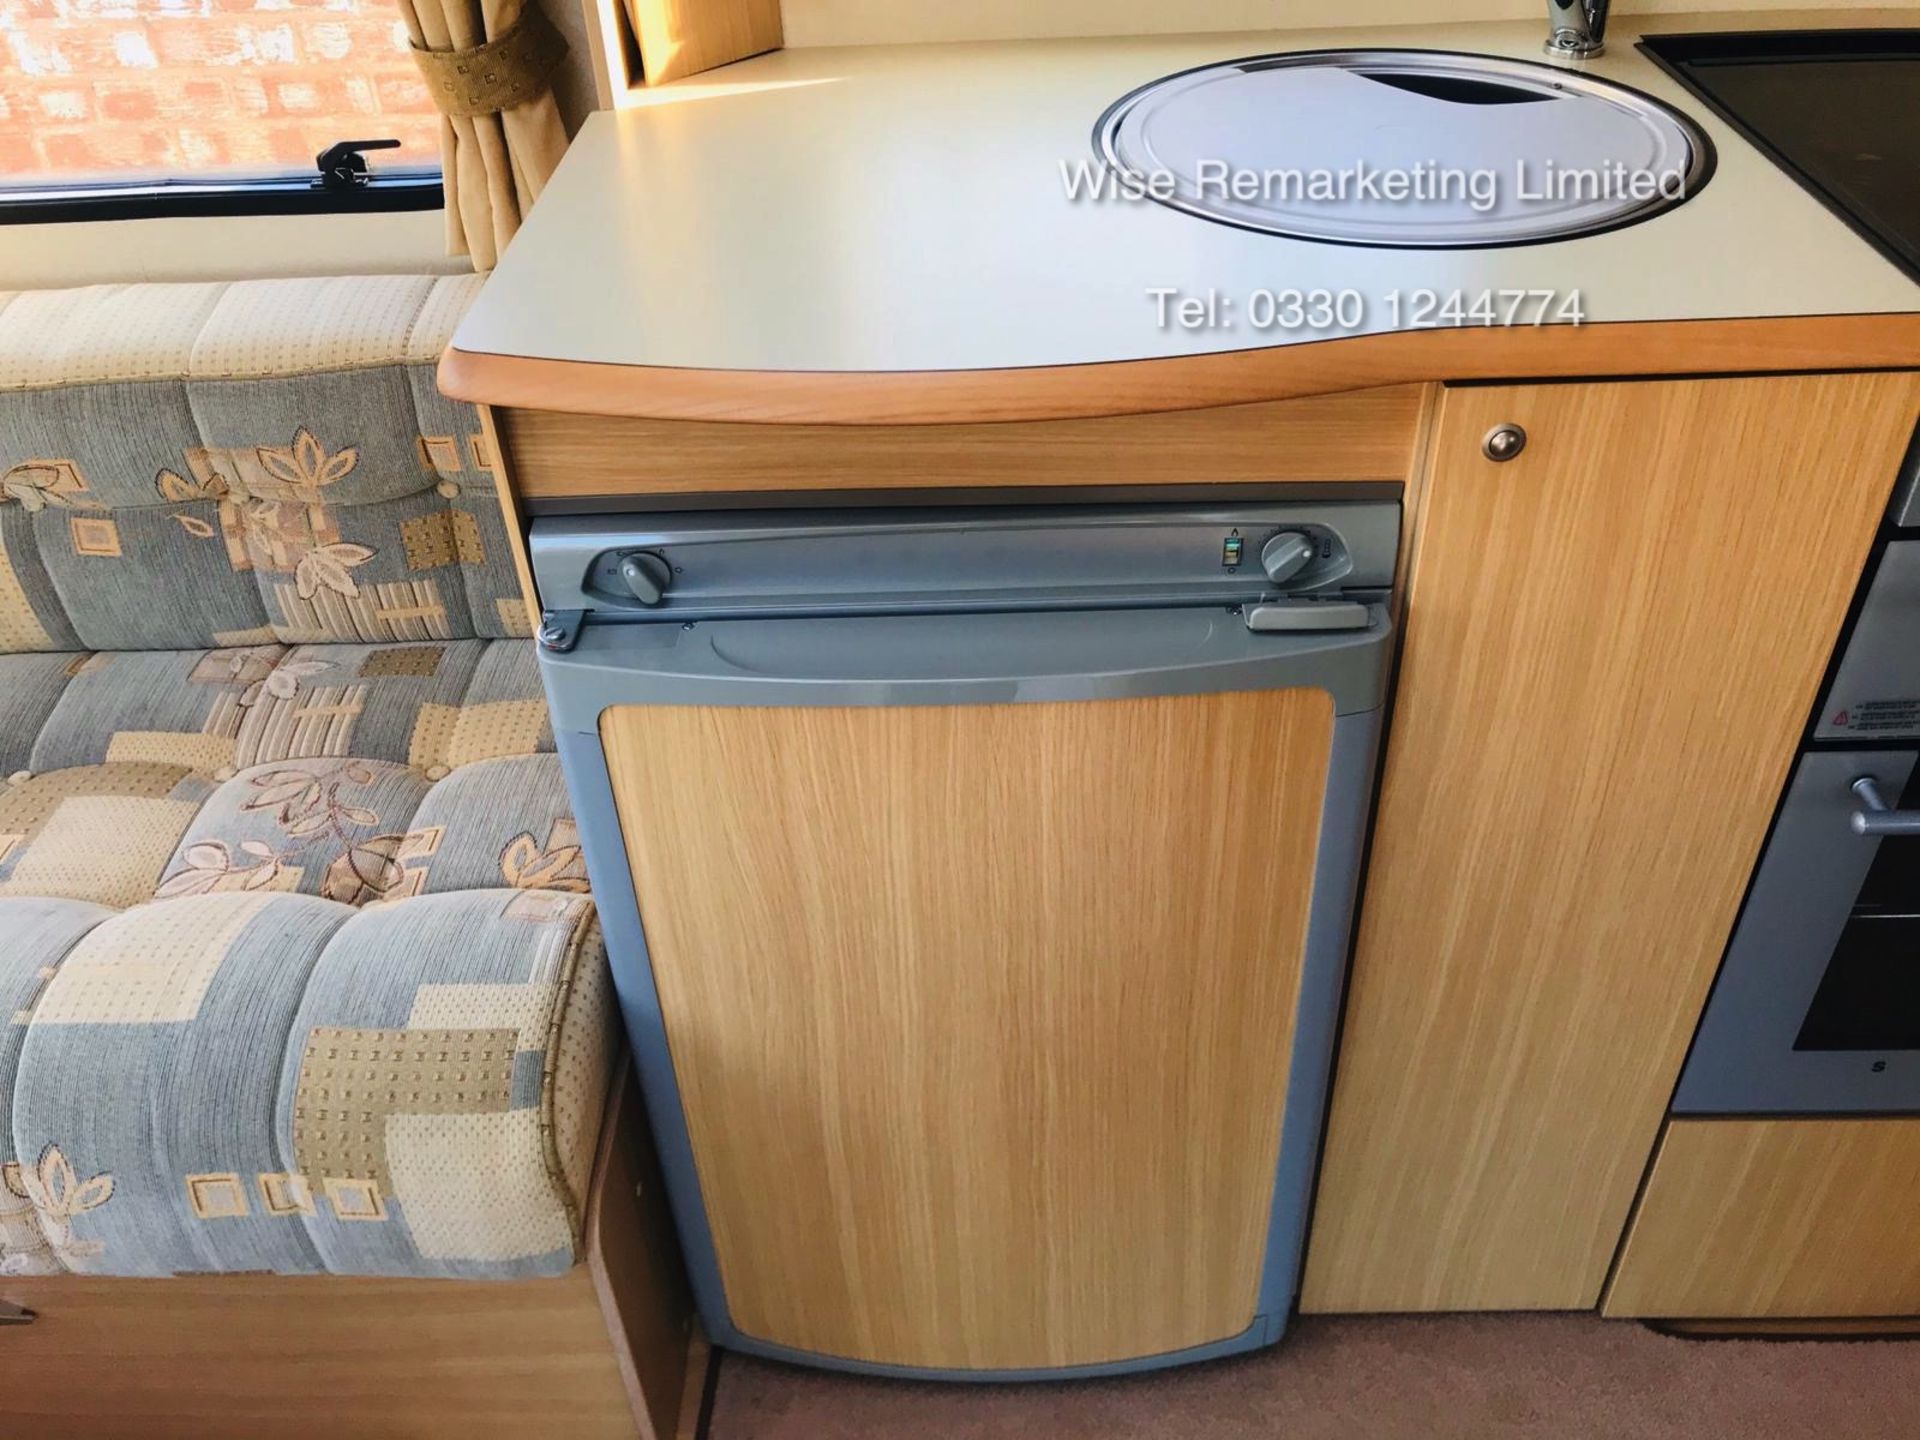 (RESERVE MET) Swift Abbey Freestyle 480 (4 Berth) Caravan - 2008 Model - 1 Former Keeper From New - Image 15 of 32